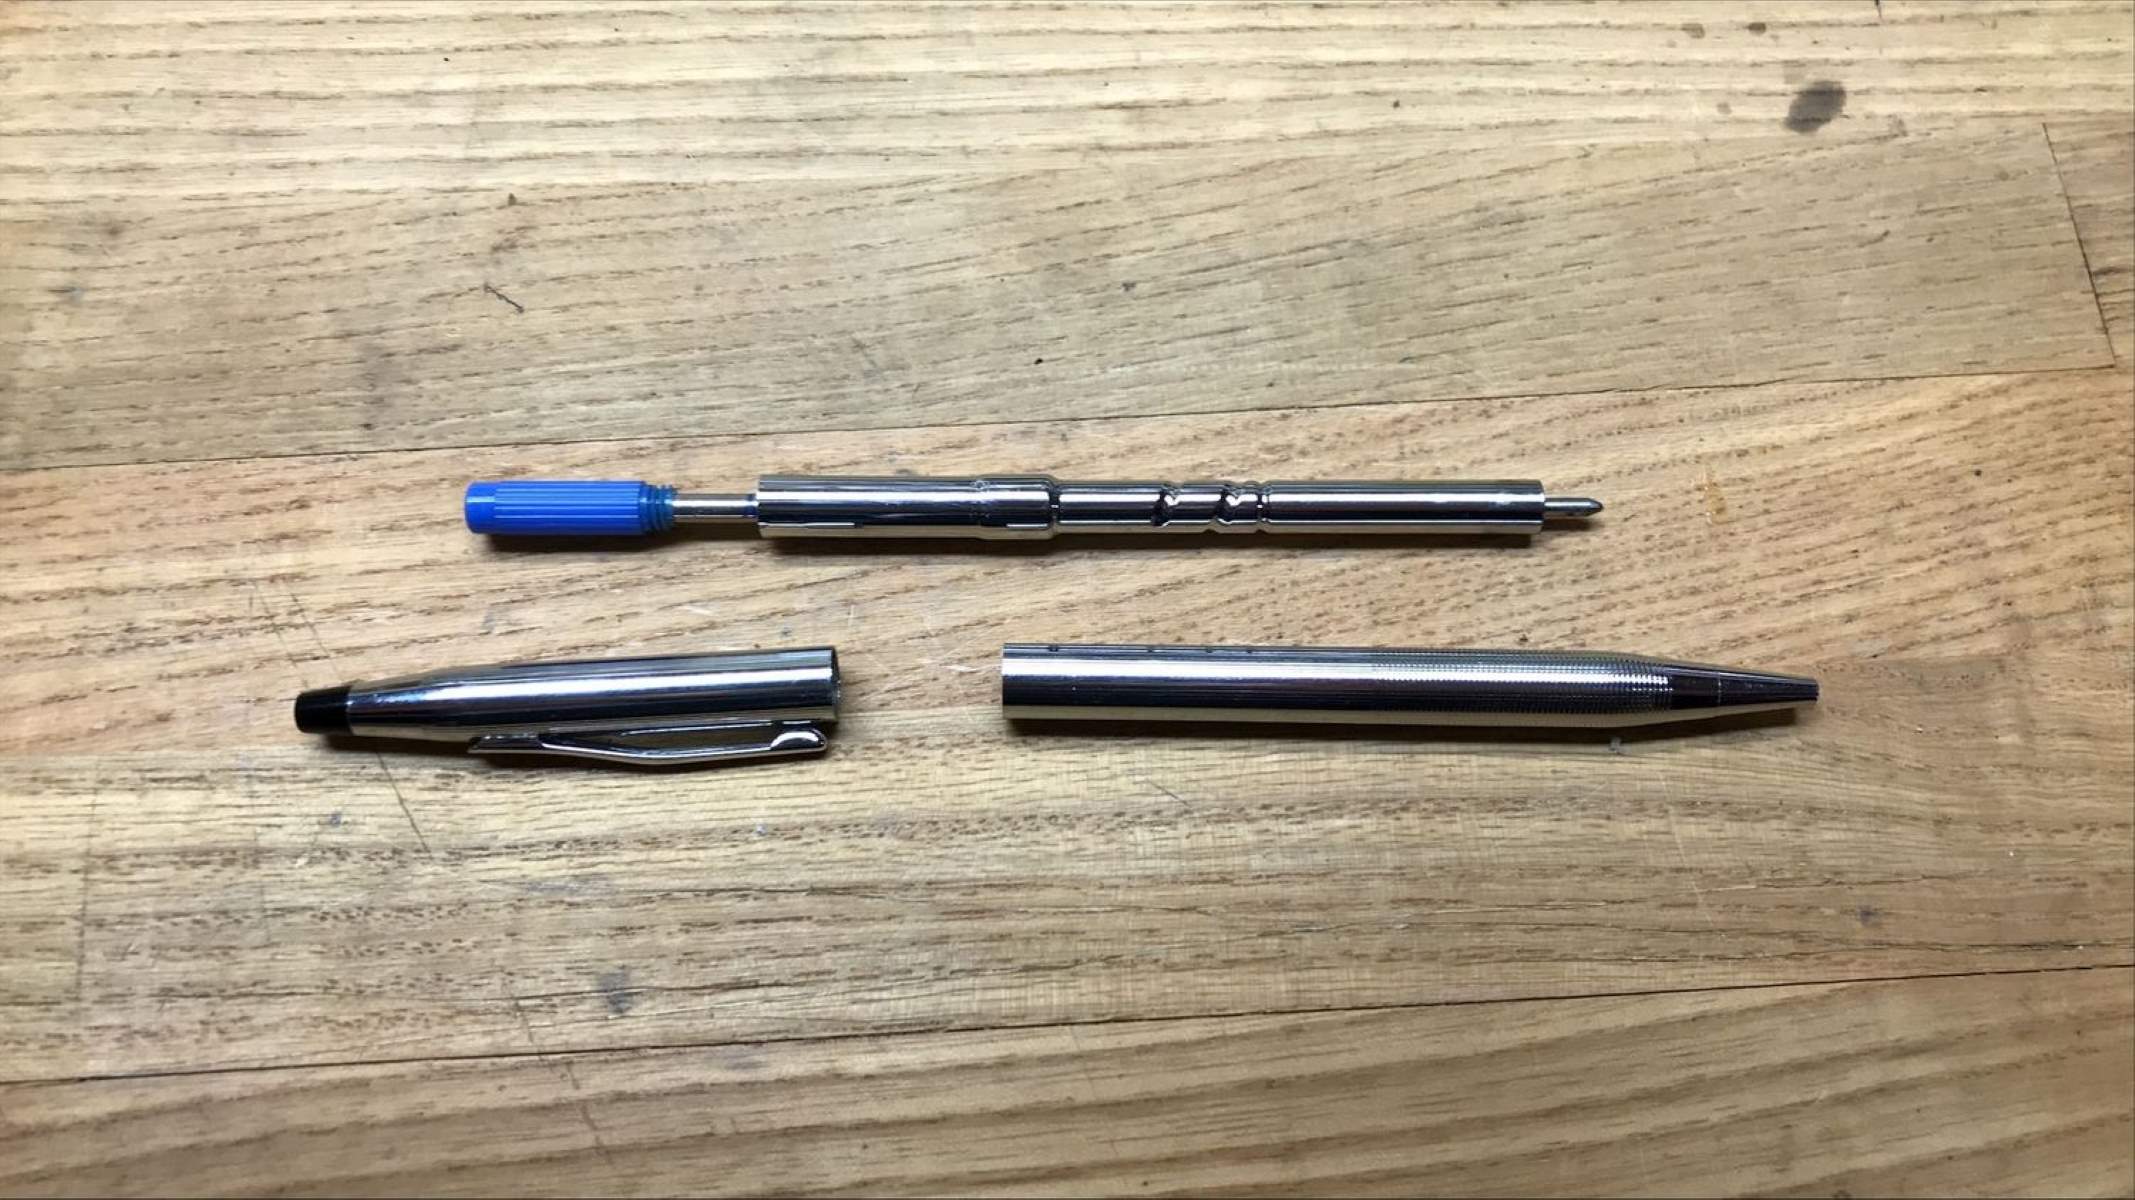 Repairing A Stylus: Step-by-Step Guide